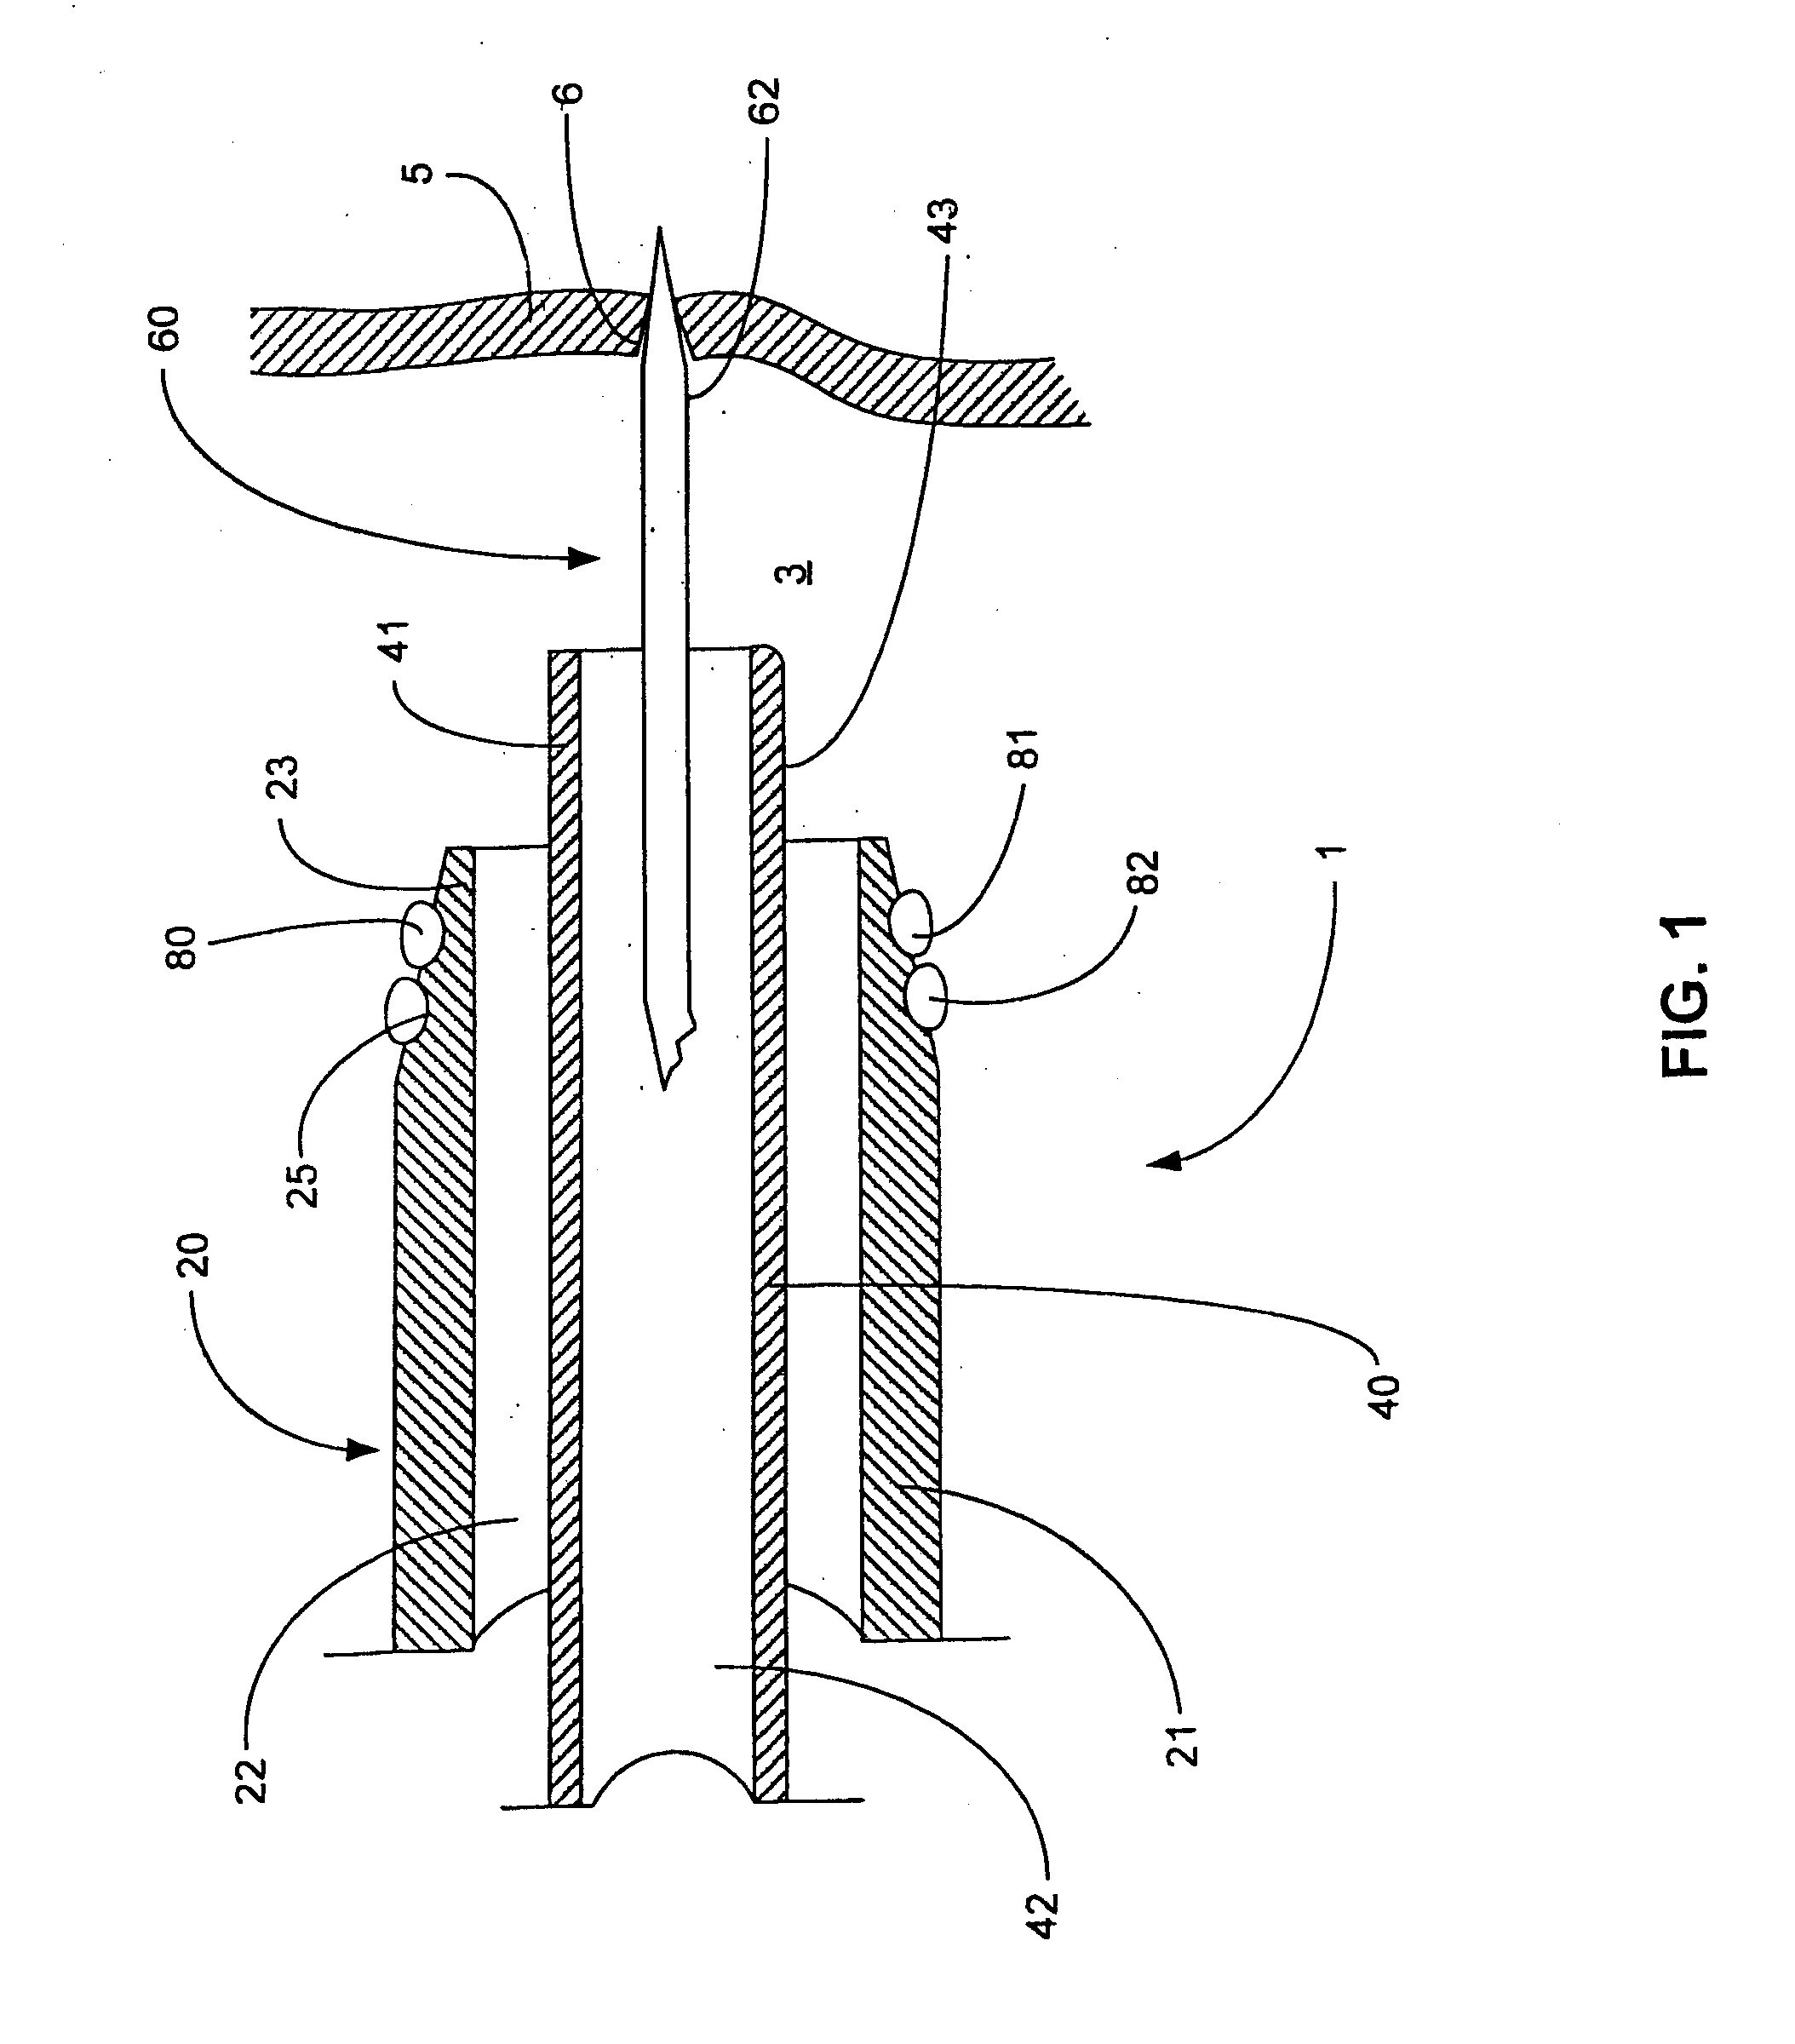 Tissue securing and sealing apparatus and related methods of use